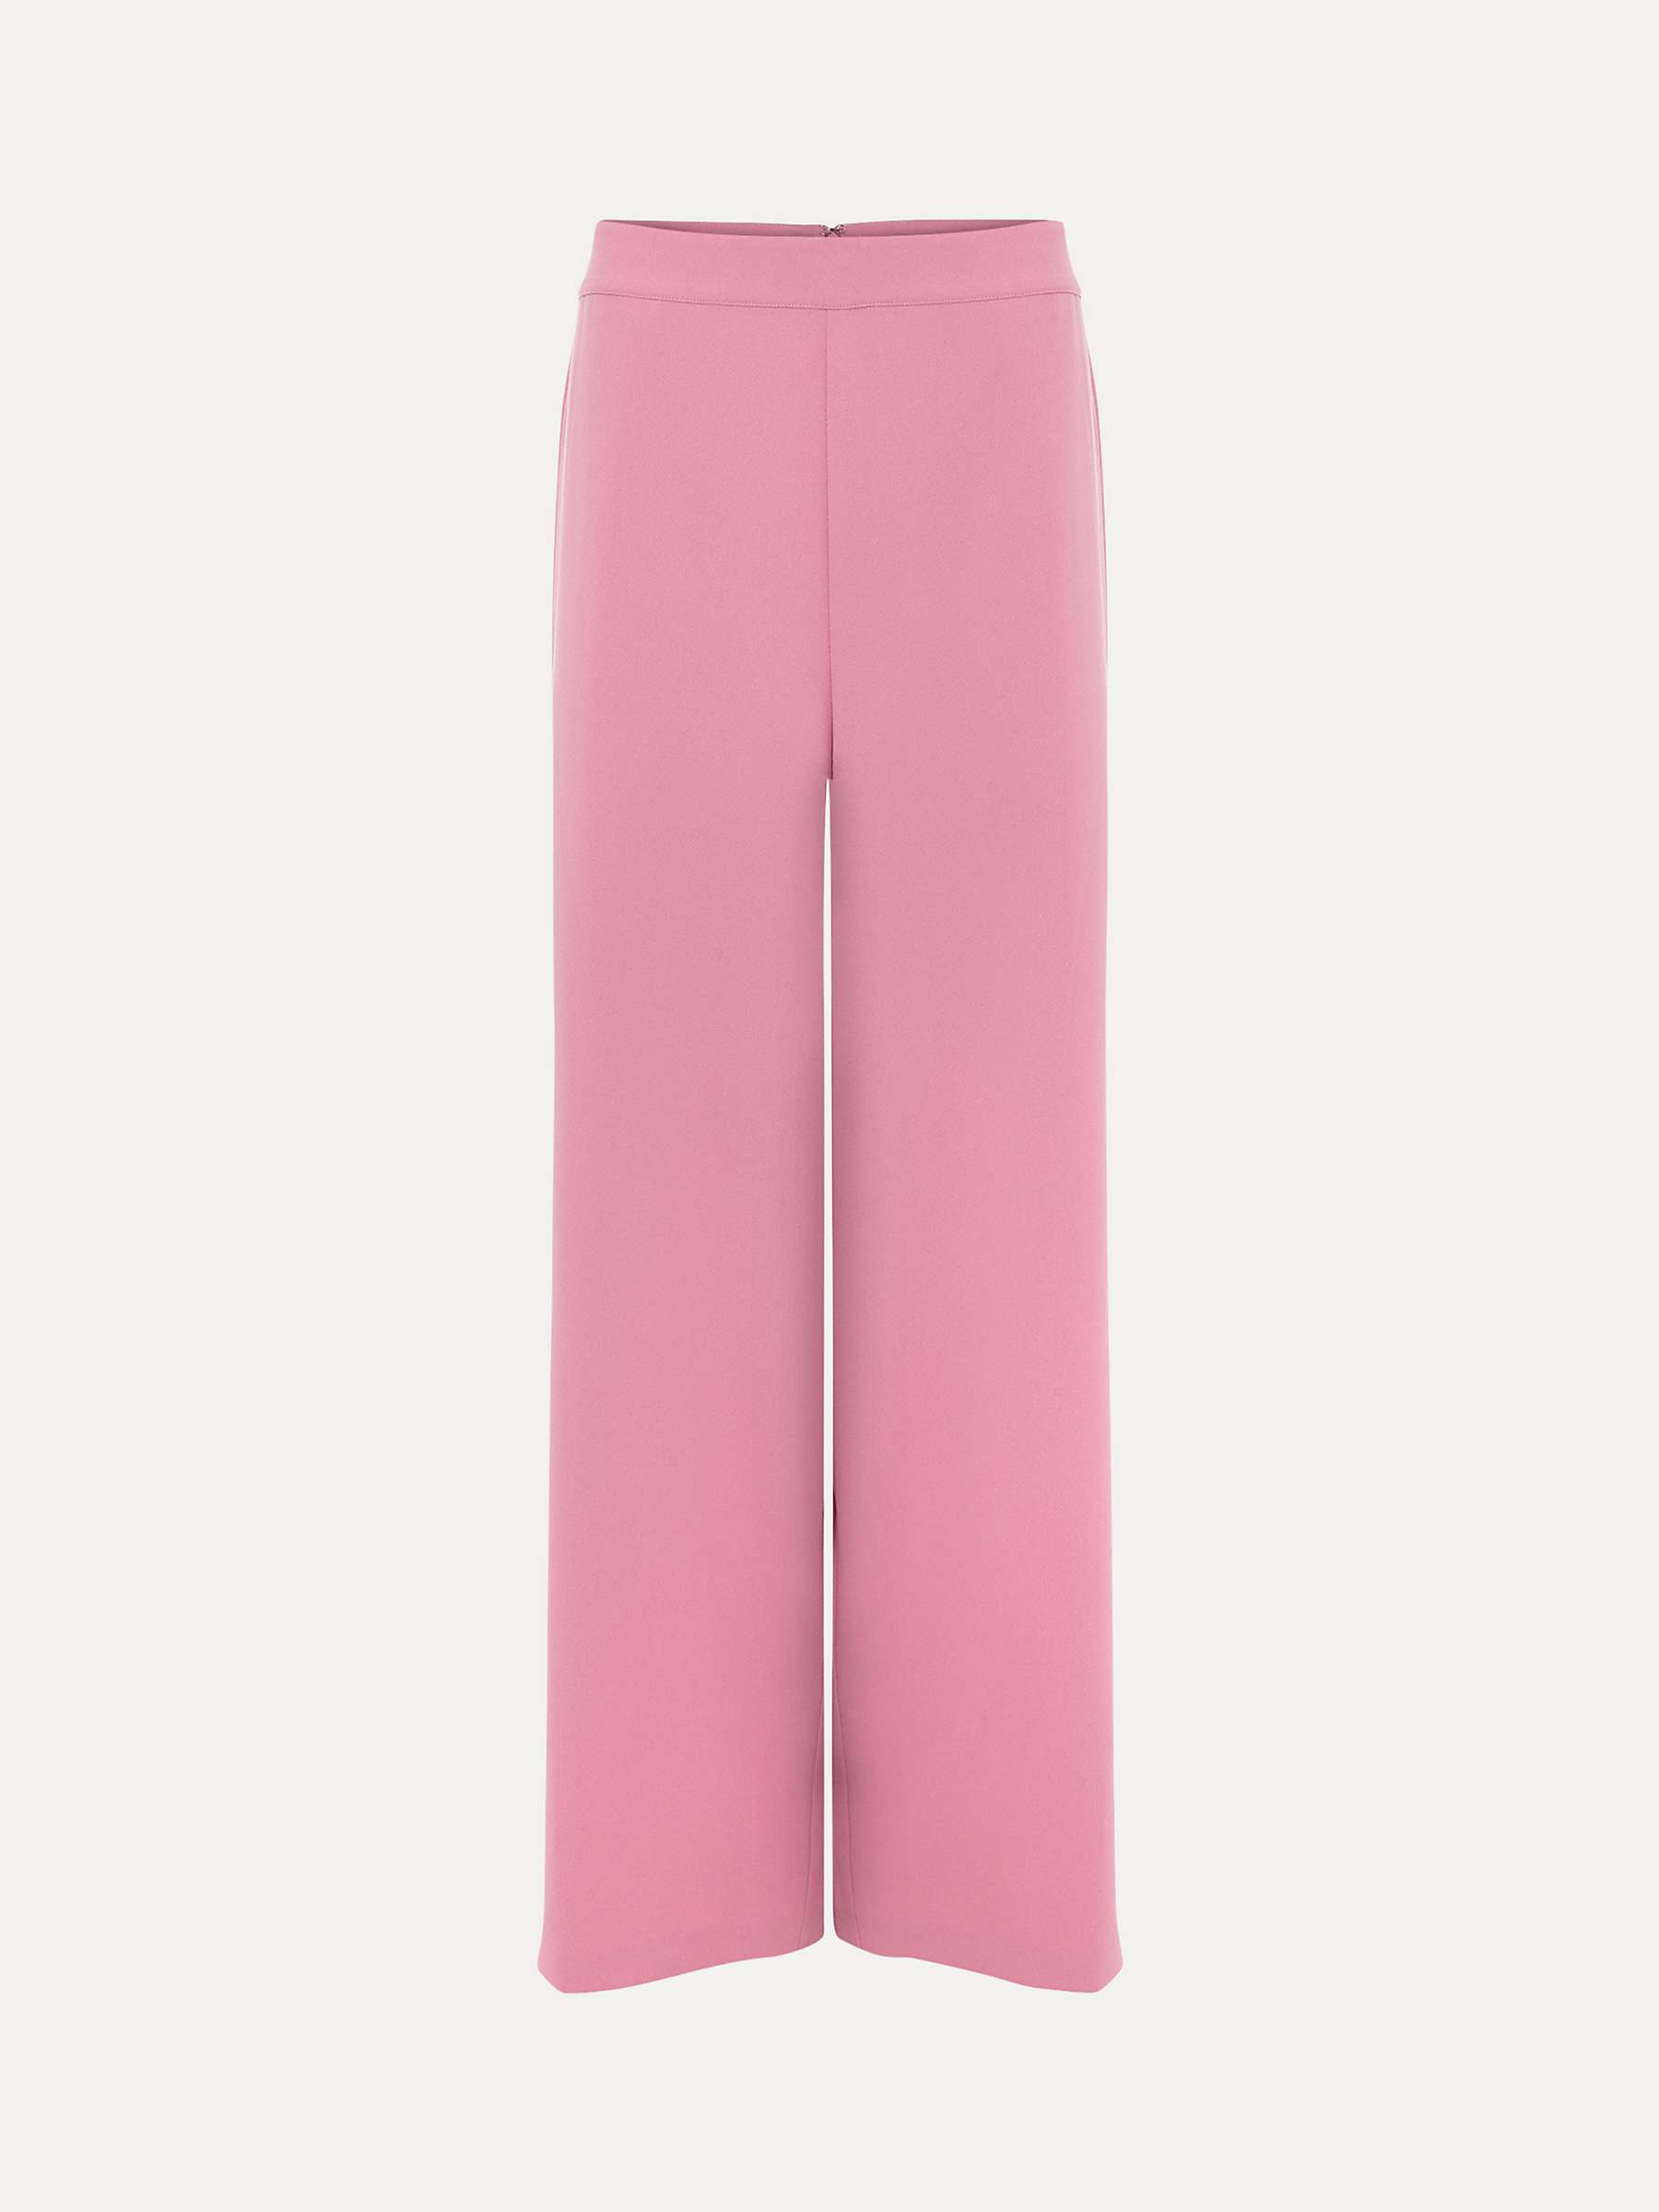 Buy Phase Eight Elandra Wide Leg Trousers, Pink Online at johnlewis.com